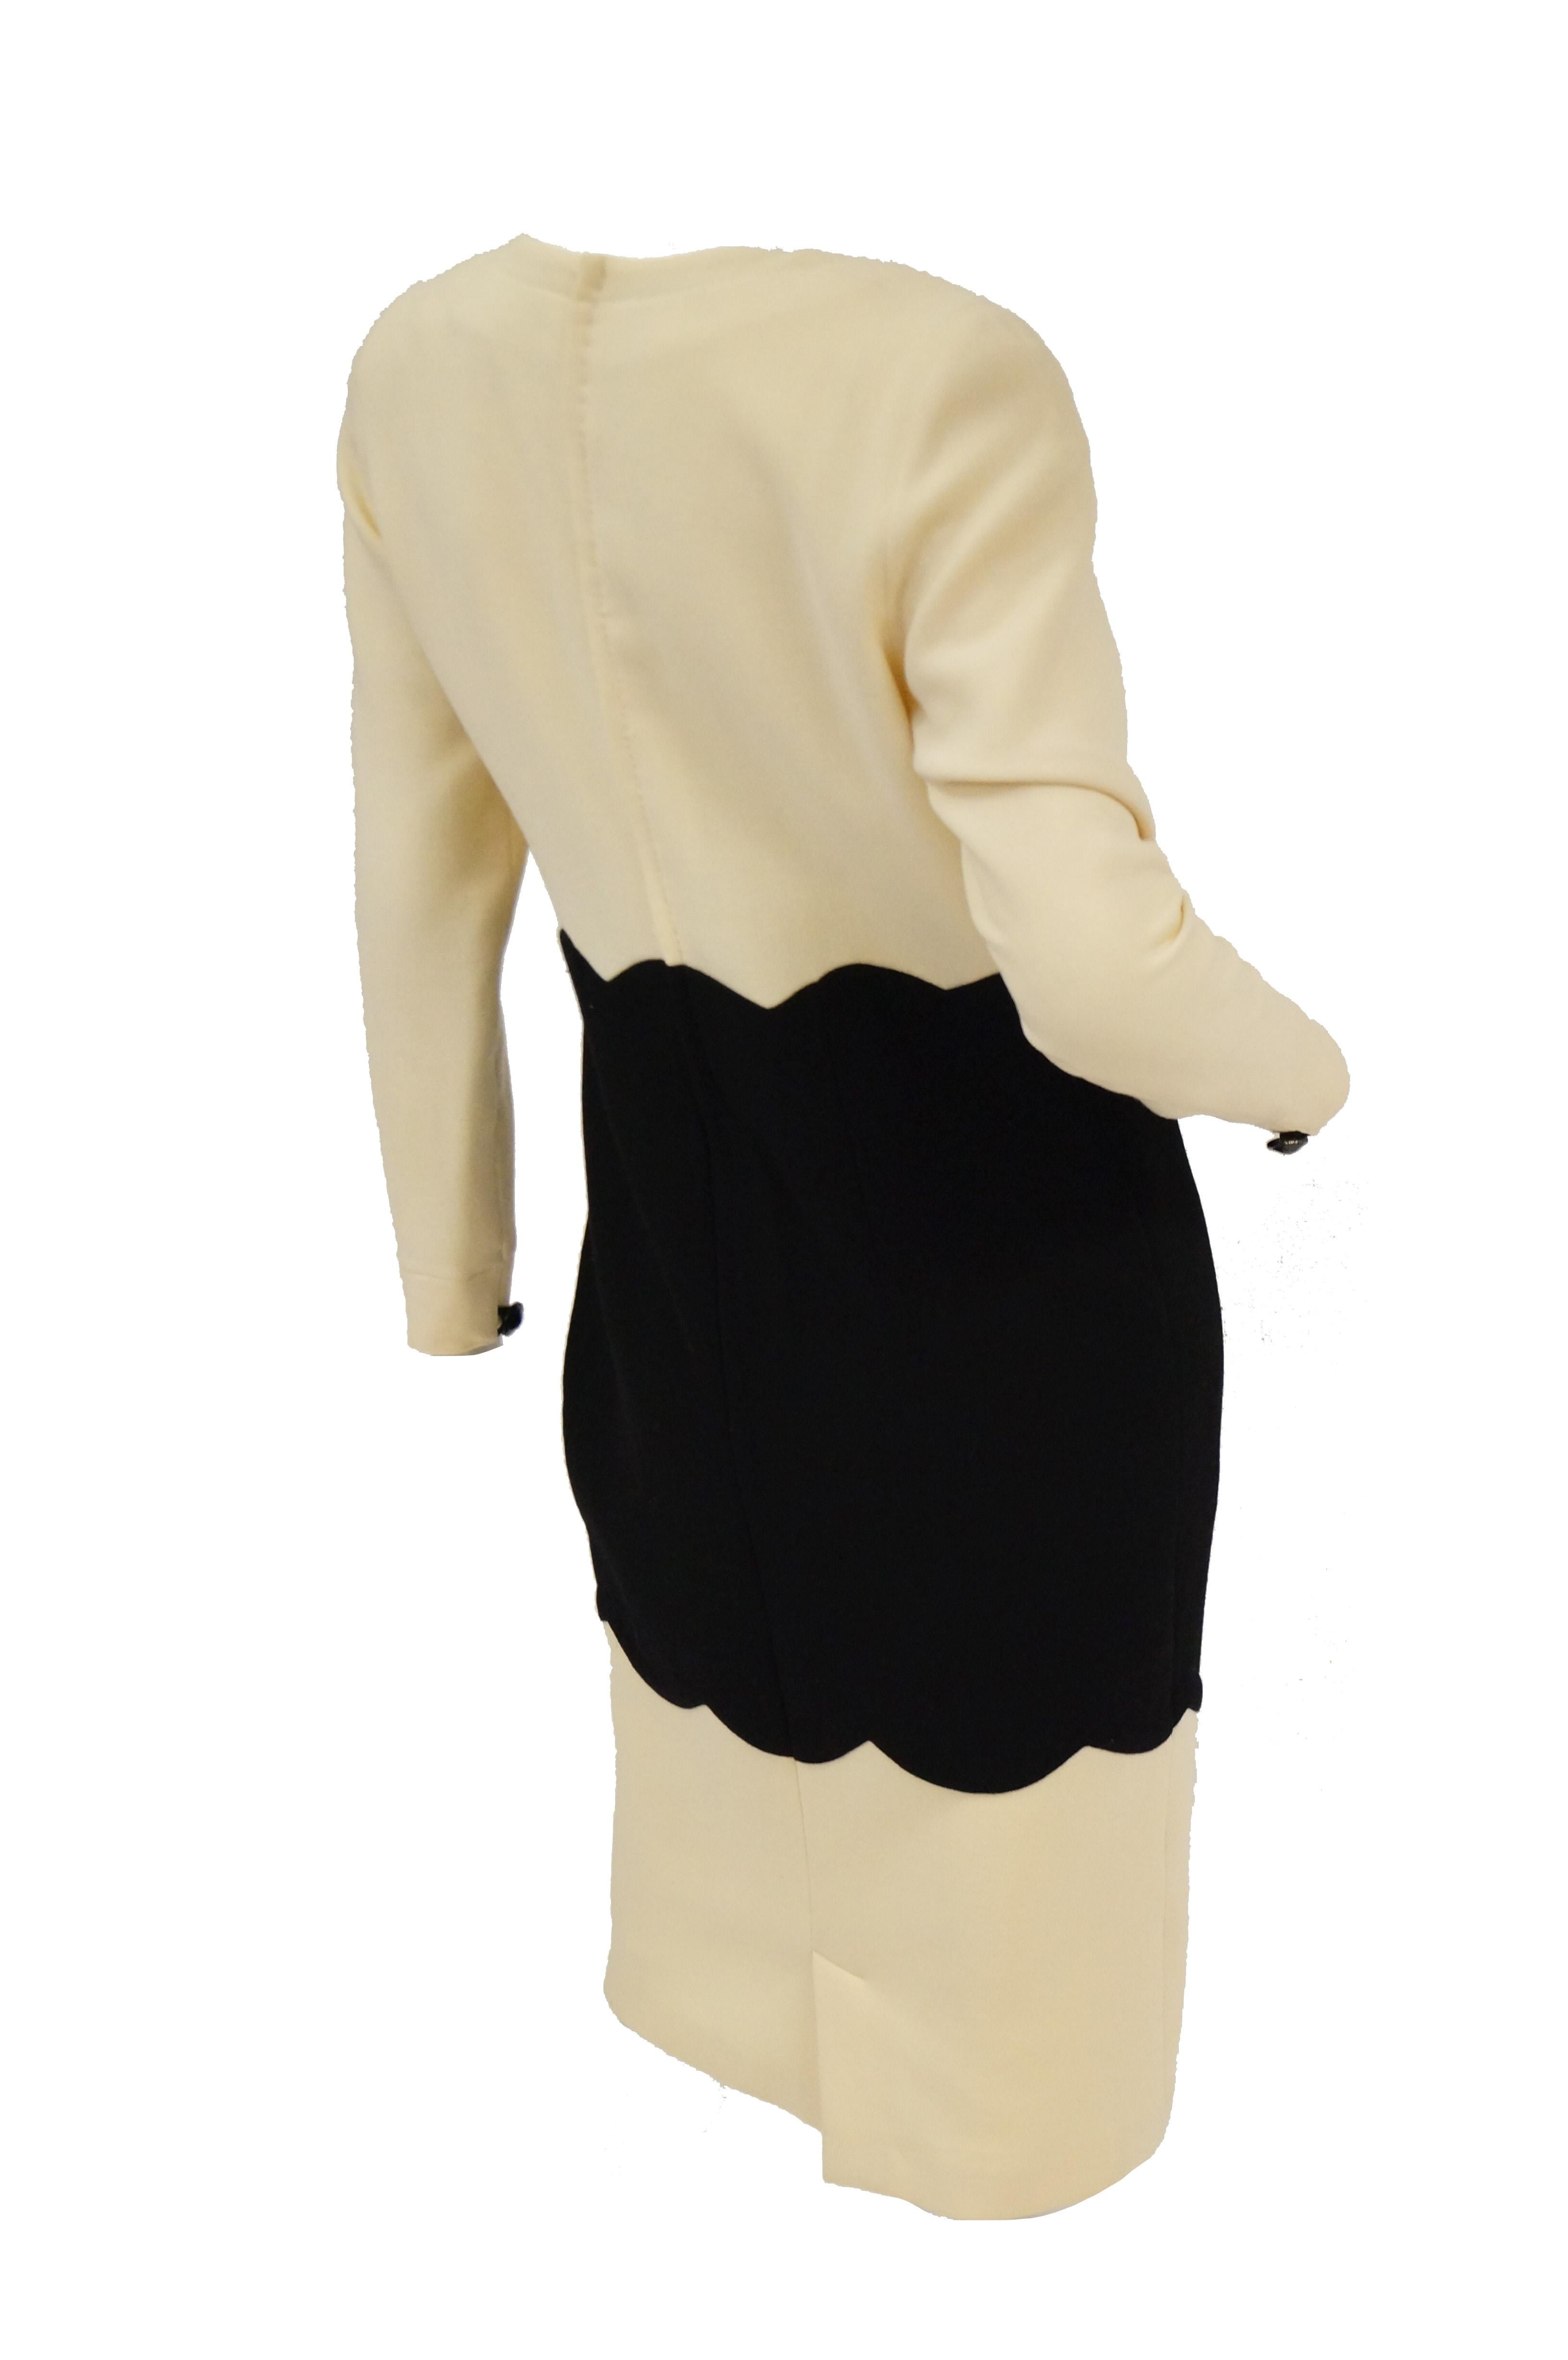 1980s Fontana Couture for Amen Wardy Cream and Black Scallop Suit Dress 2